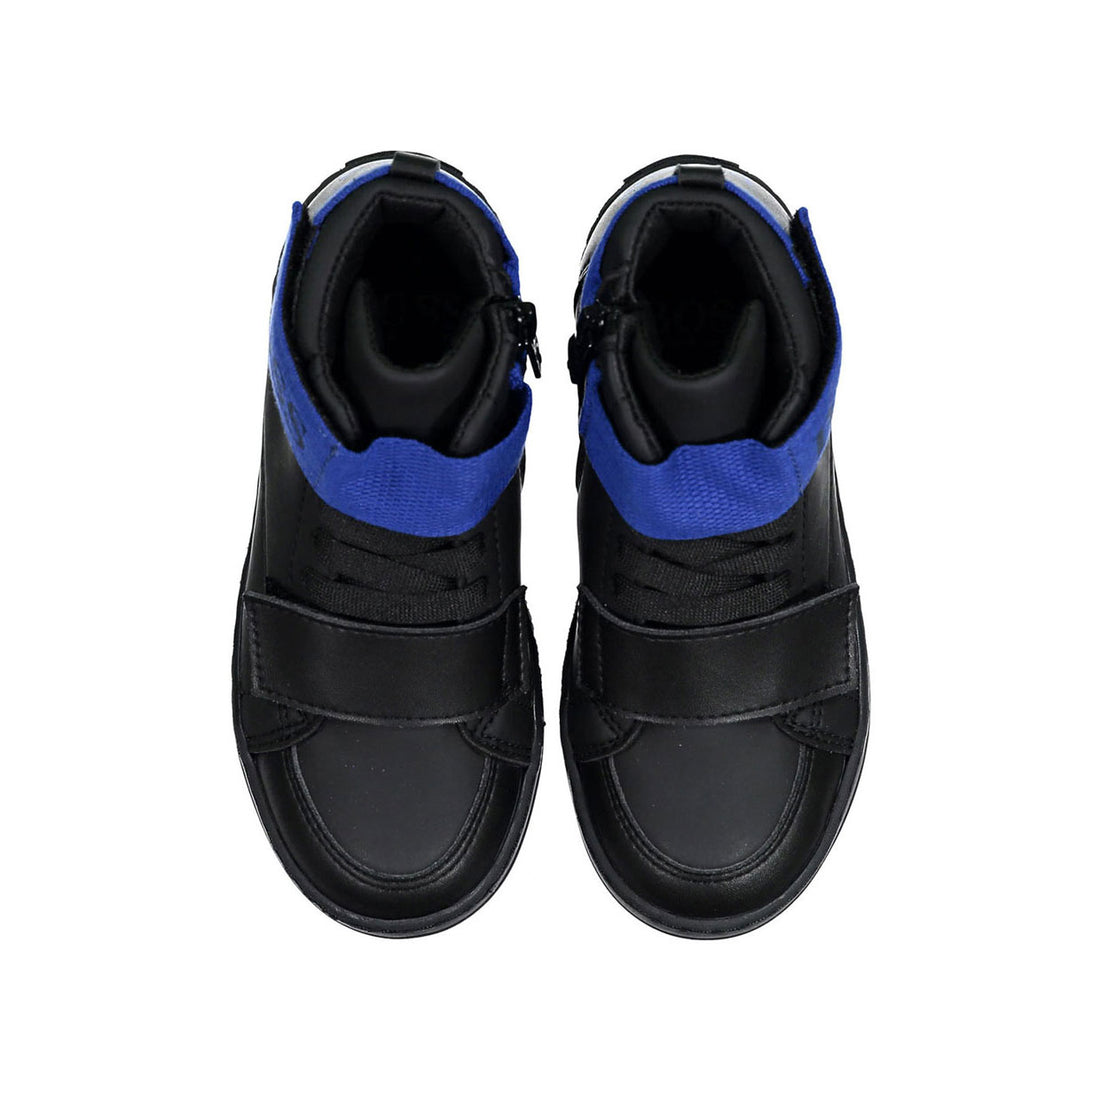 Hugo Boss Black Midcut Lace Tie Sneakers With Blue Scratch Closure